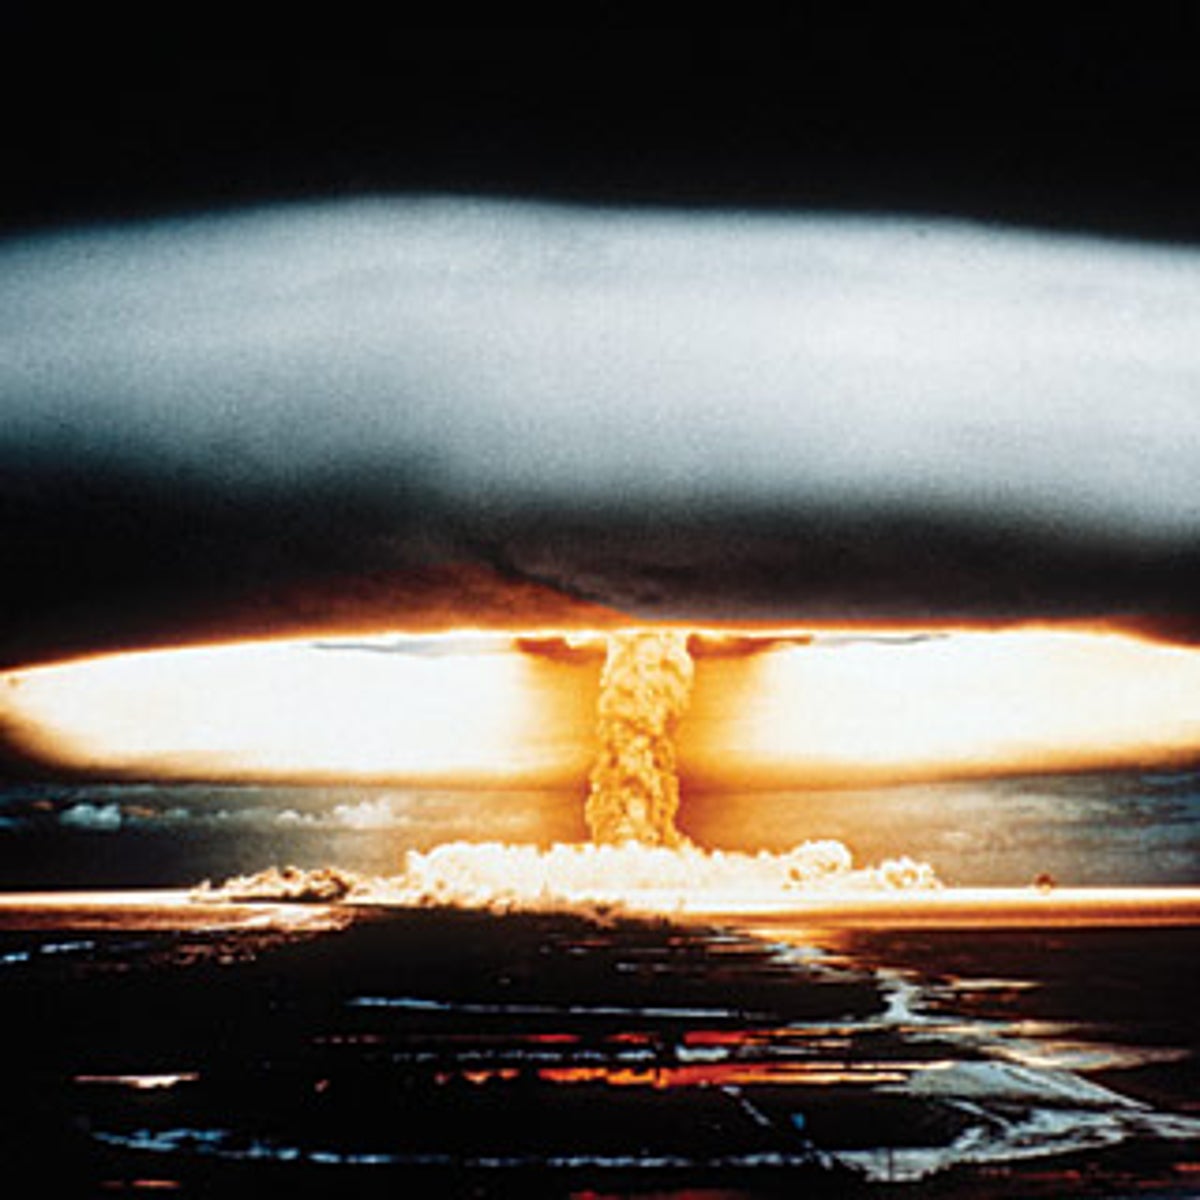 Astounding' new sensors make U.S. nukes more powerful and more accurate.  But they may create additional security perils